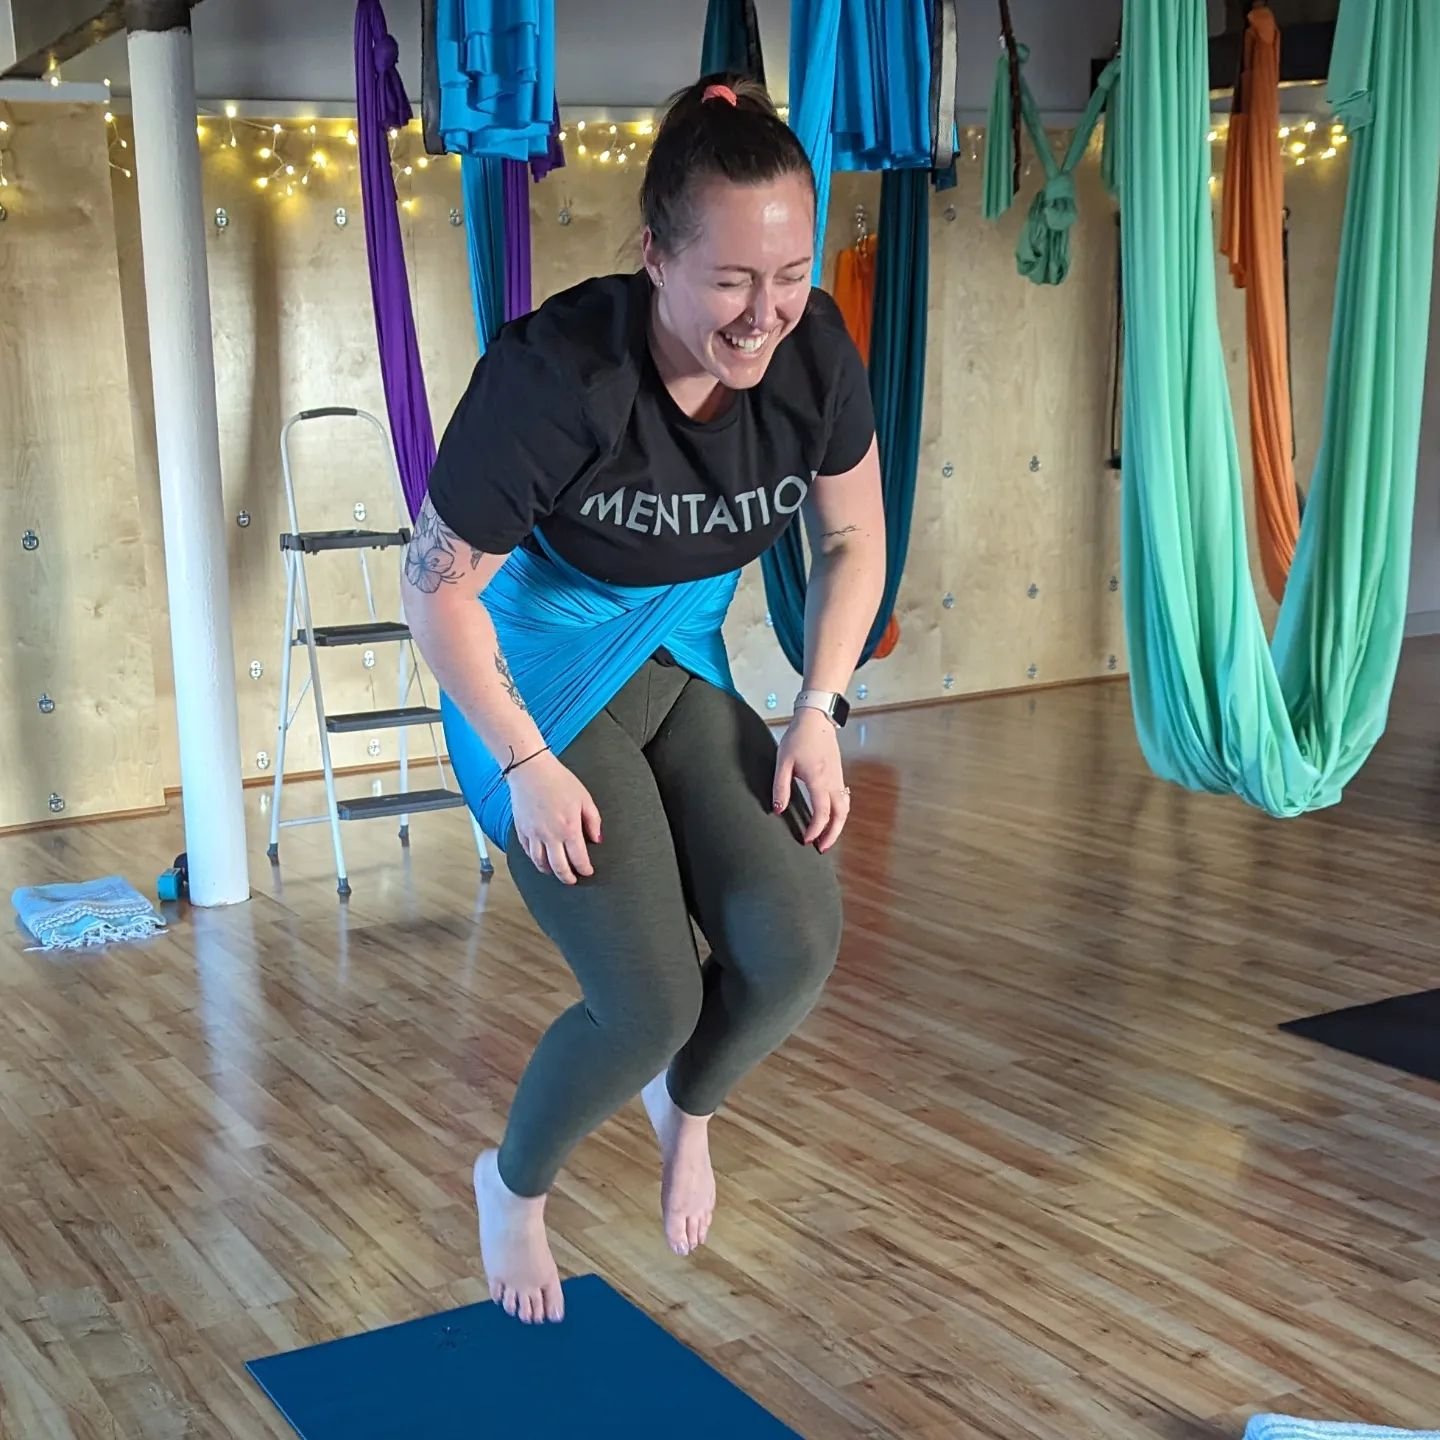 Sometimes we just get silly 😂
It's nice not to always have to be quiet &amp; serious in a yoga class
Sunday &amp; Monday have been joyful even as we've challenged ourselves a bit 💖

Love you all! Robin 

#aerialyoga #havemorefun #flipandtwist #aeri